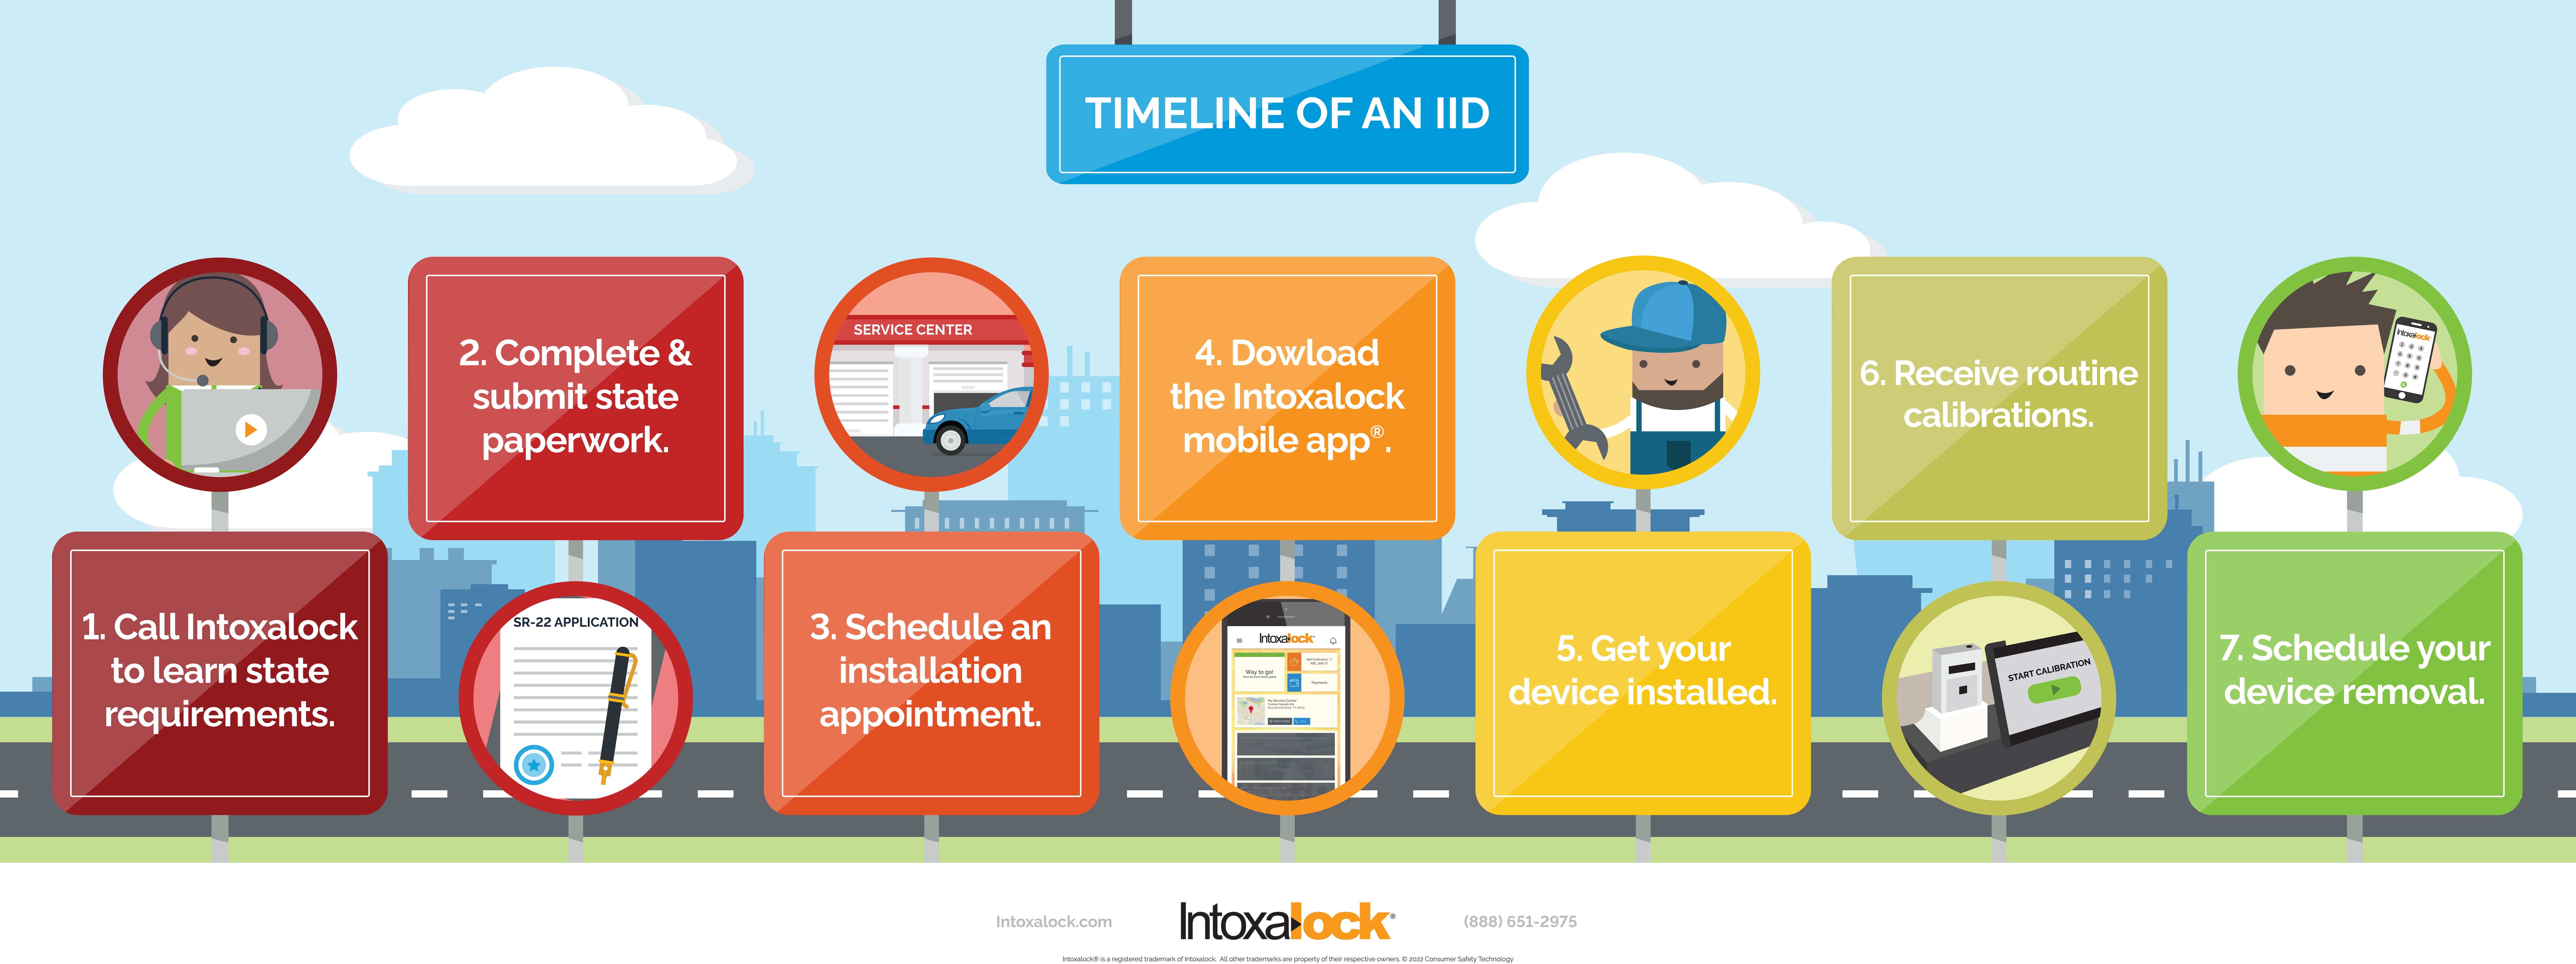 Timeline of an IID